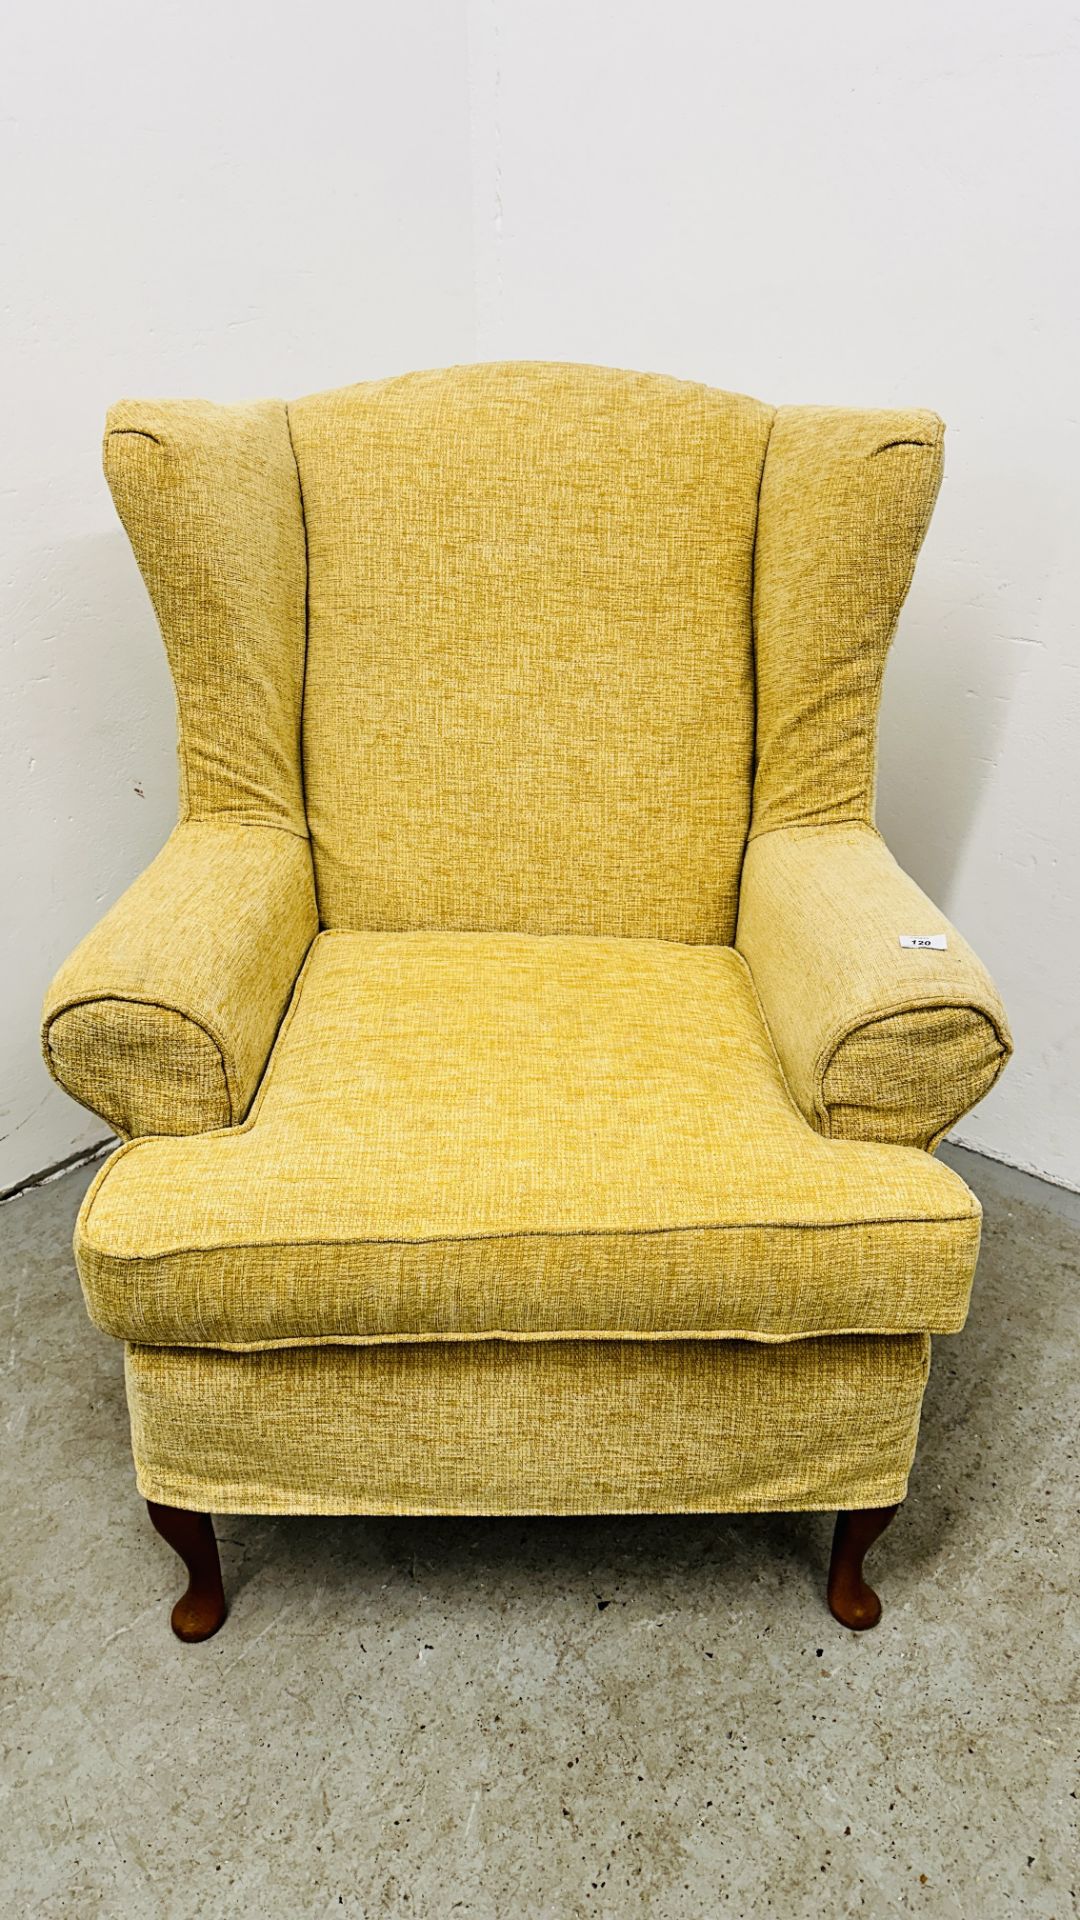 A GOOD QUALITY MODERN PRIMROSE UPHOLSTERED WINGBACK EASY CHAIR.